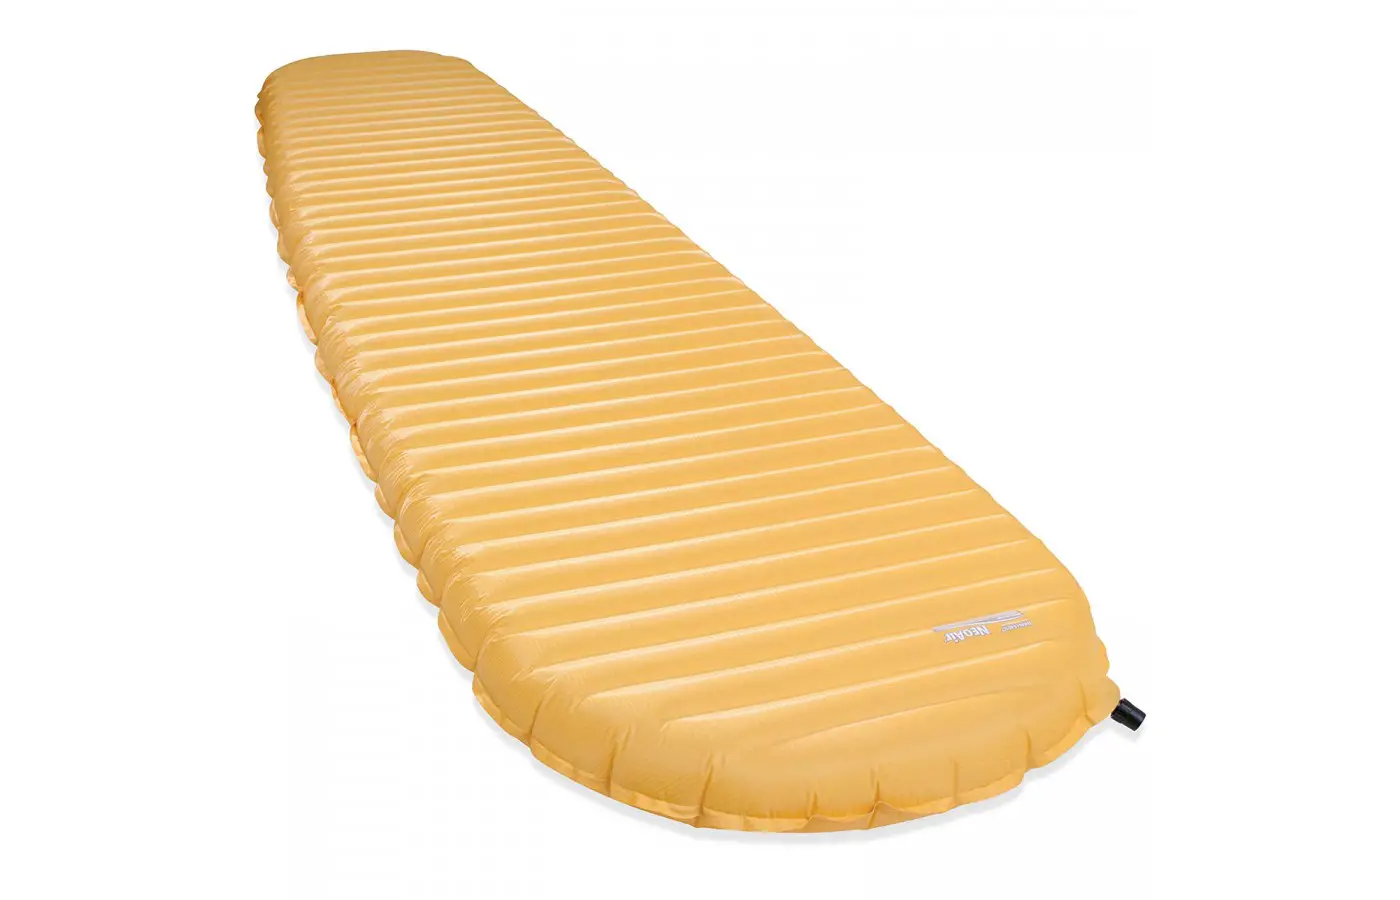 This mattress is extremely lightweight.